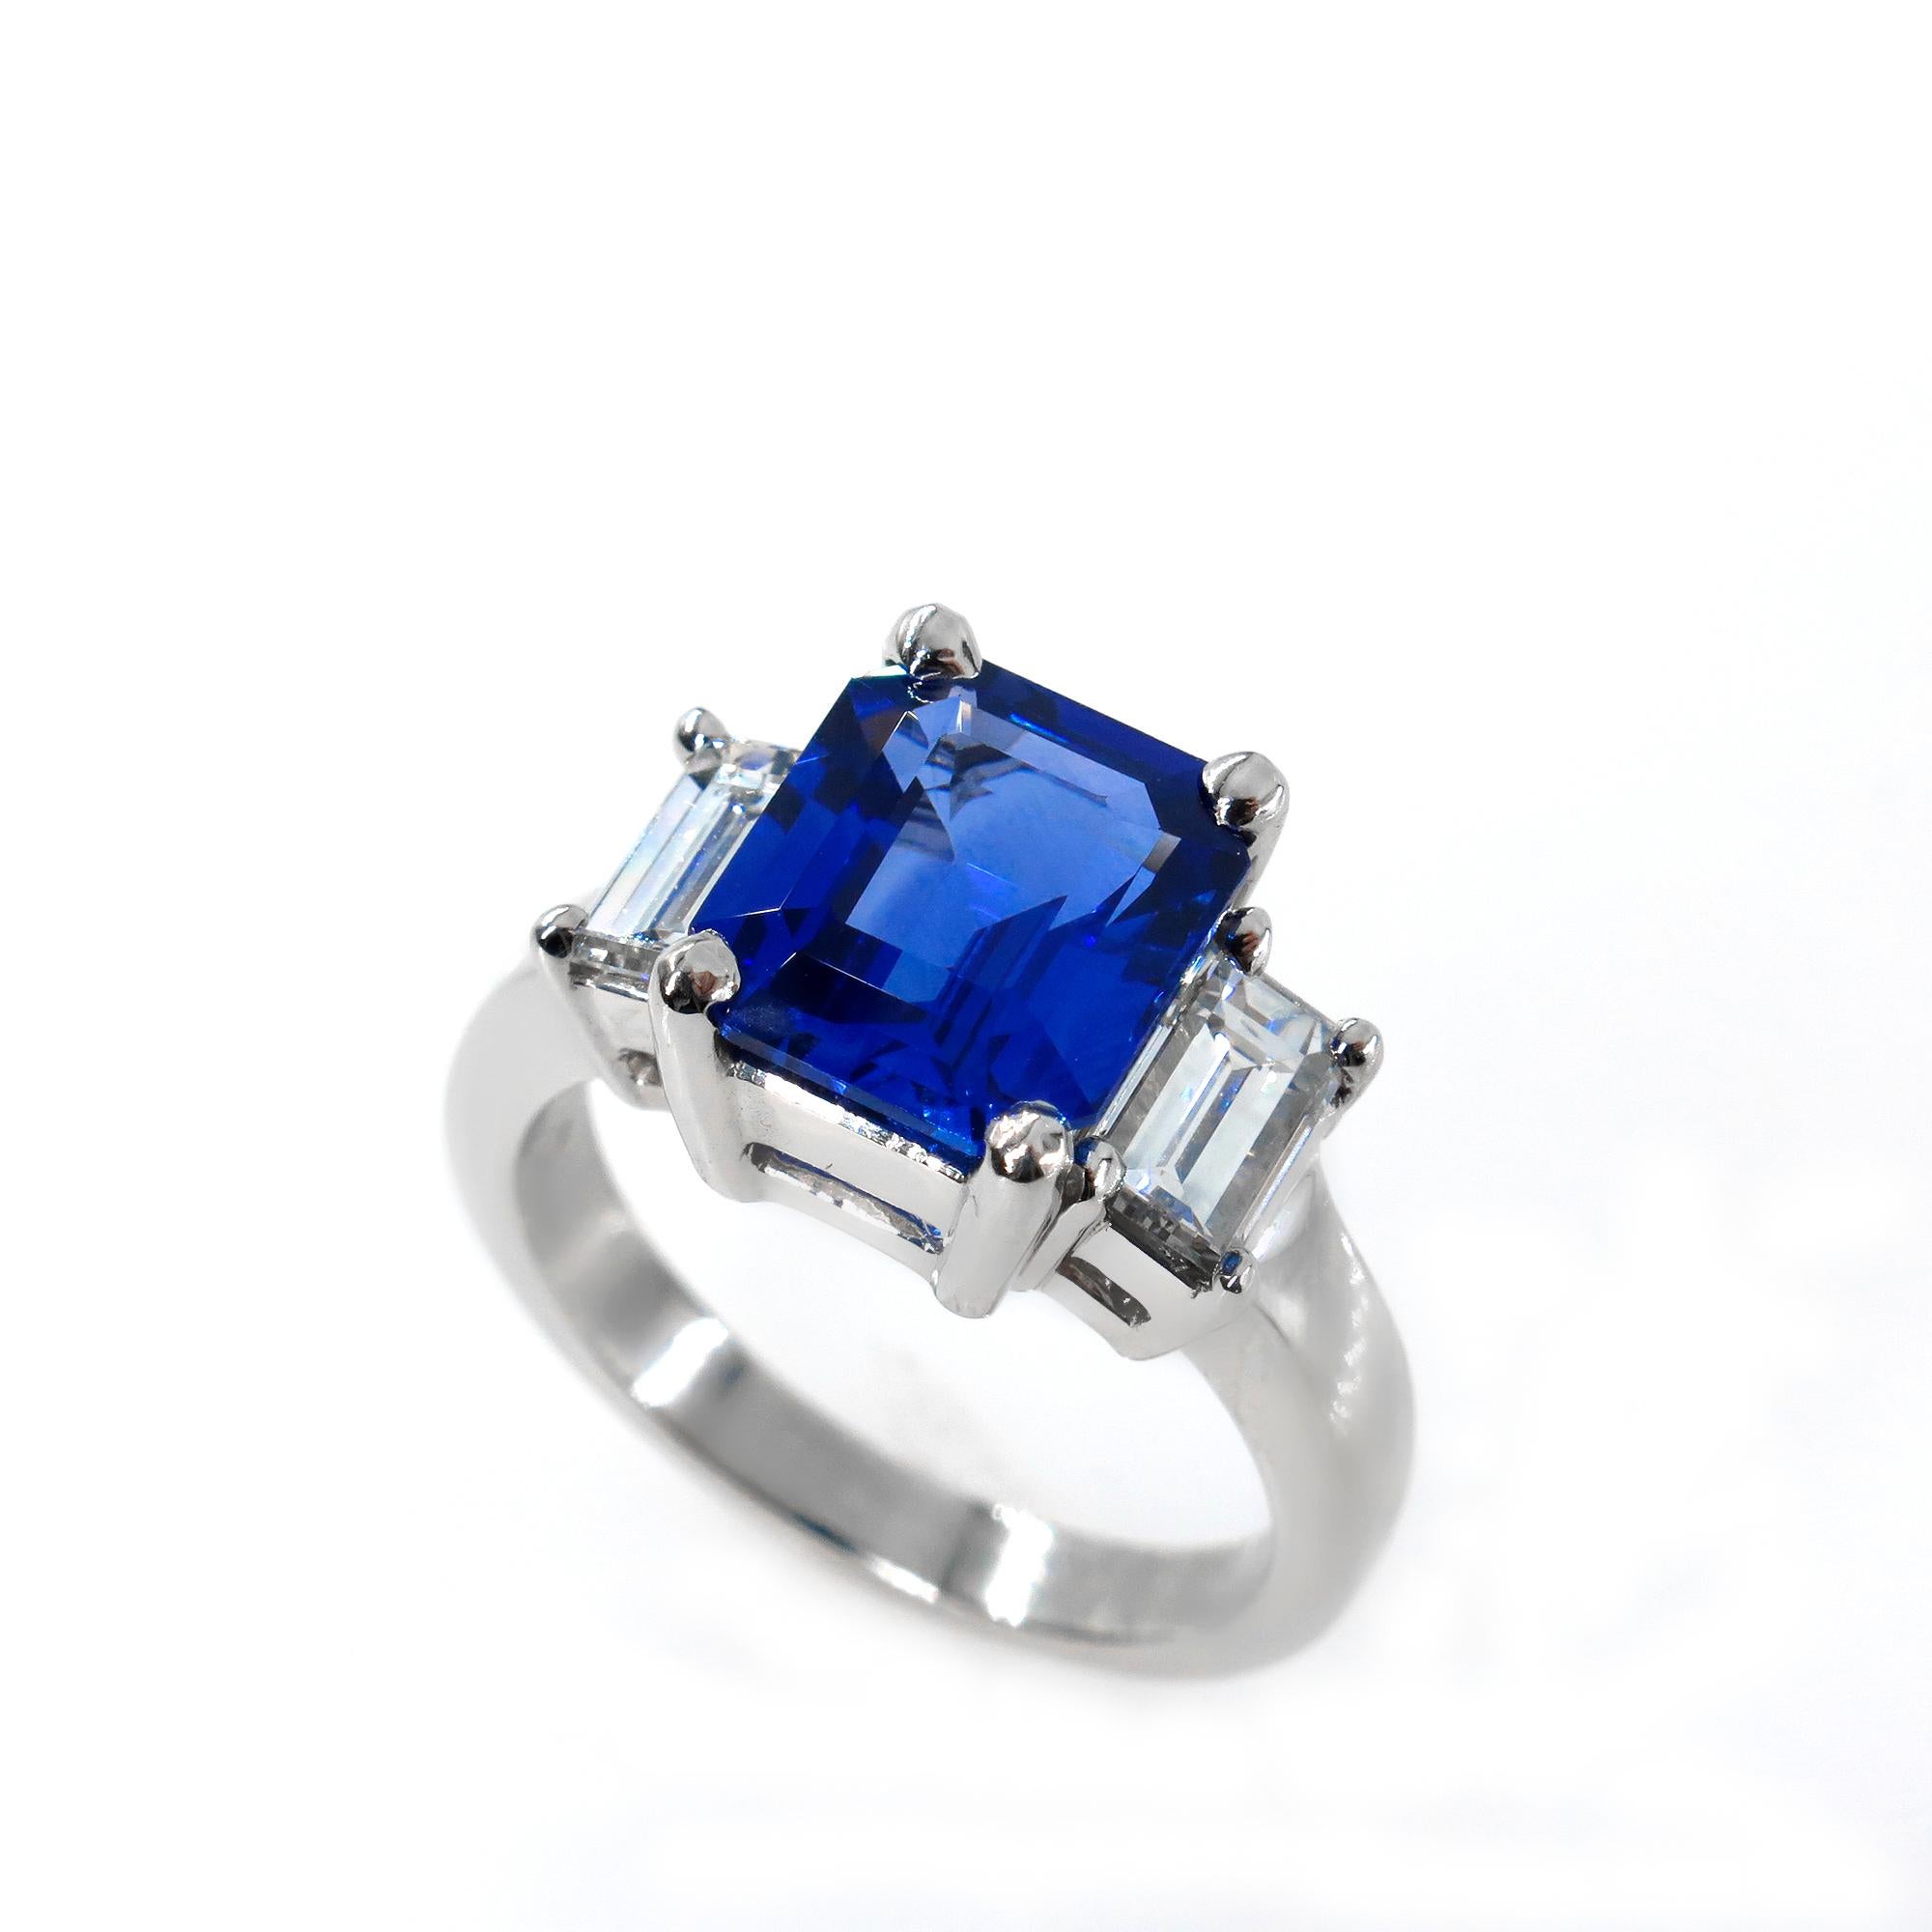 Iconic Style and VERY ELEGANT Ceylon Natural Gorgeous Deep Blue Sapphire & Diamond Trilogy Ring.
A SUPER fine Estate Ring features a Gorgeous gem : 3.53 carat Natural CEYLON EMERALD Cut Deep Blue Sapphire Measuring 9.15x8.05x4.95mm, bearing a recent